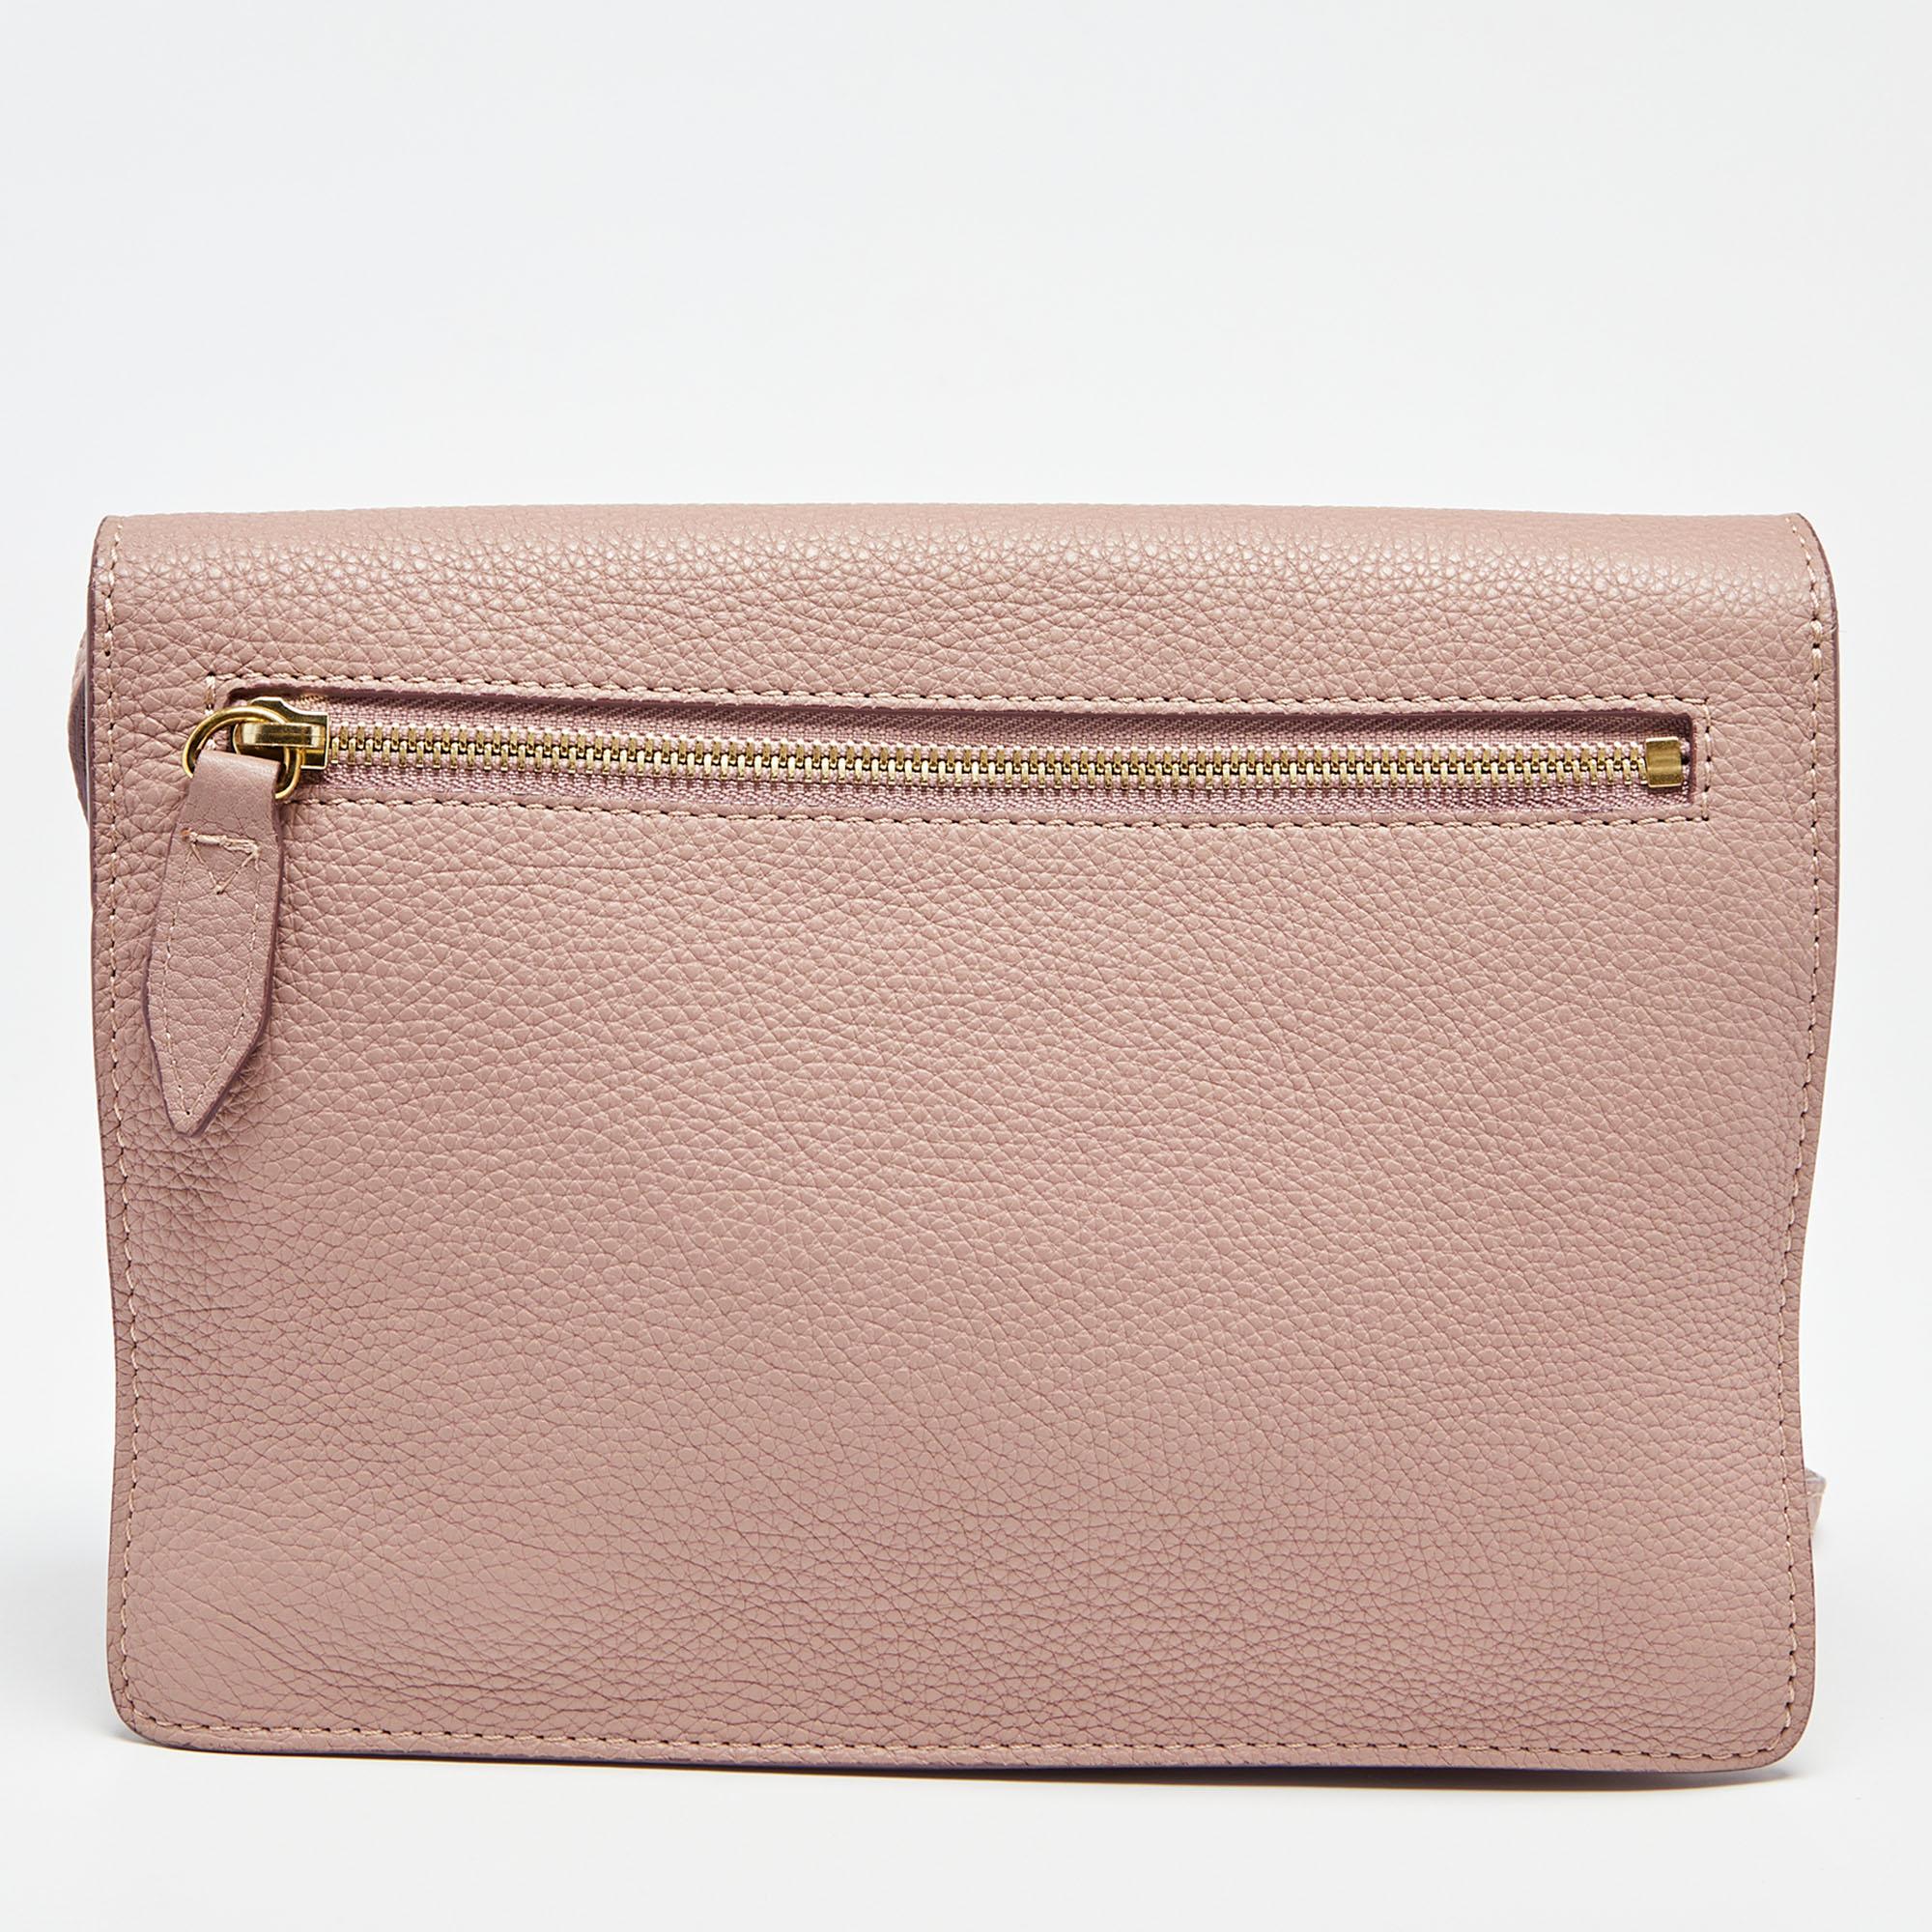 This Macken crossbody bag from Burberry is both elegant and fashionable. Crafted from pink House Check fabric and leather, this bag features a chain strap, gold-tone hardware, and a spacious fabric-lined interior. Make this stunning bag your